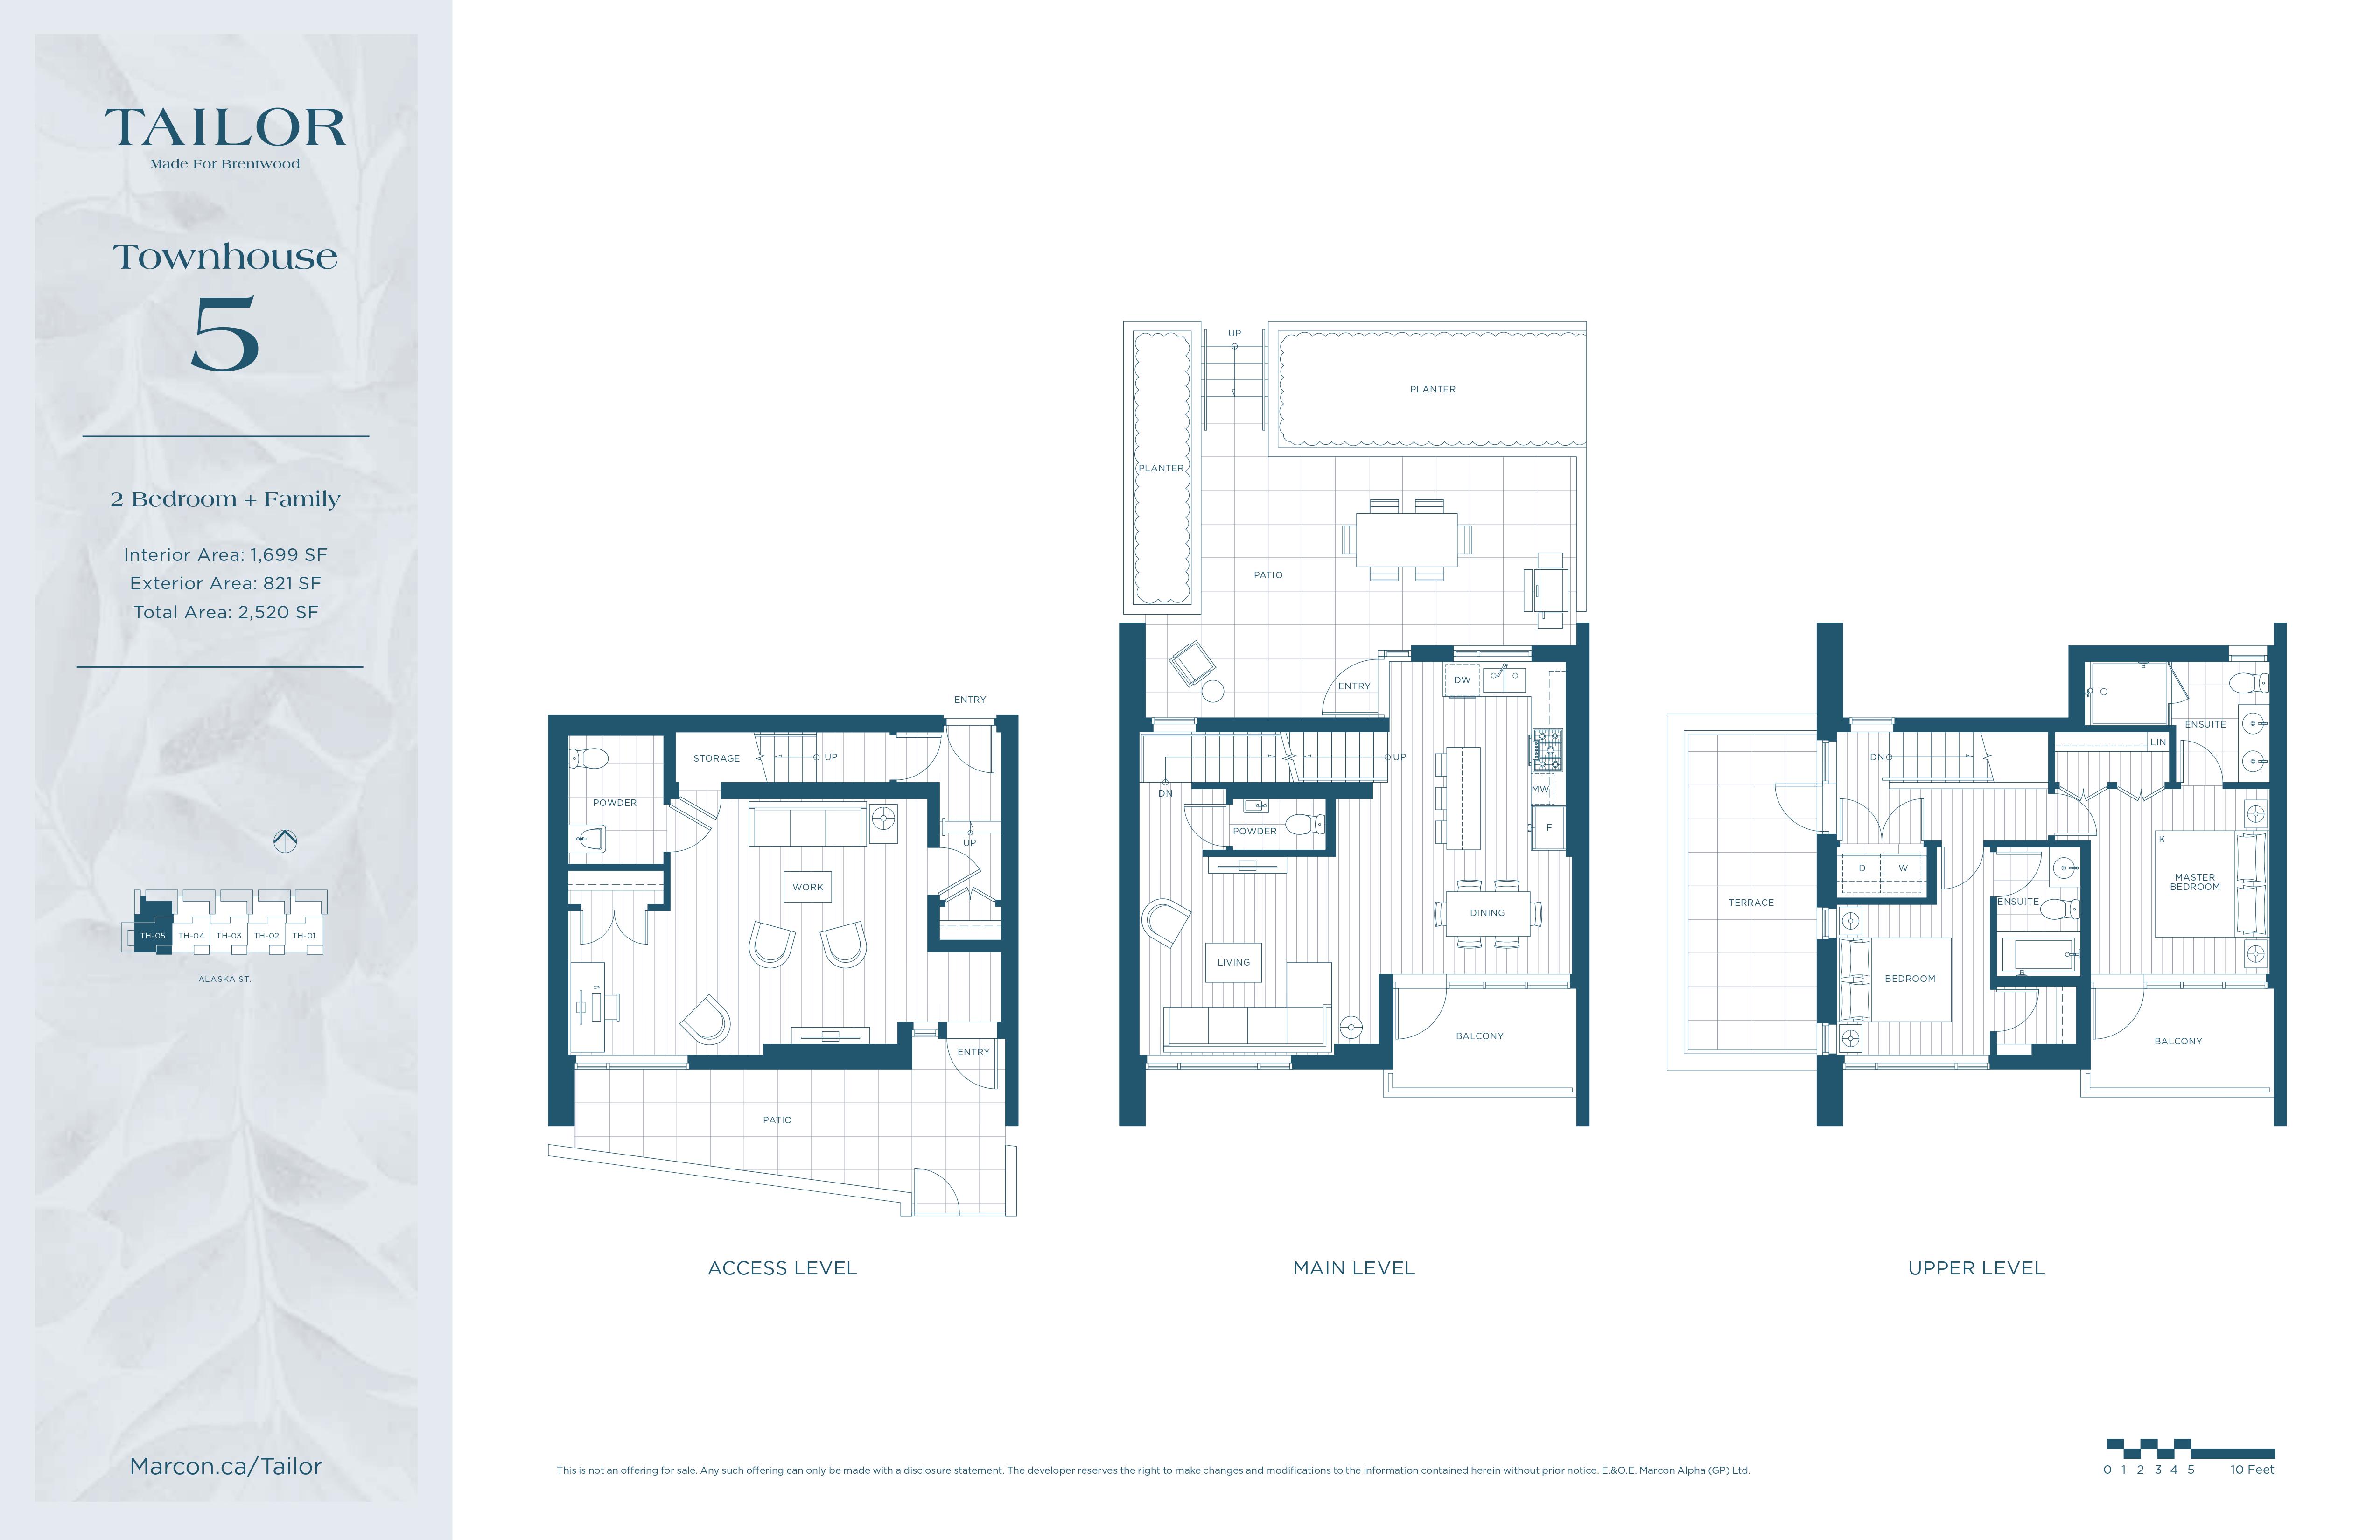  Townhouse 5  Floor Plan of Tailor Condos with undefined beds